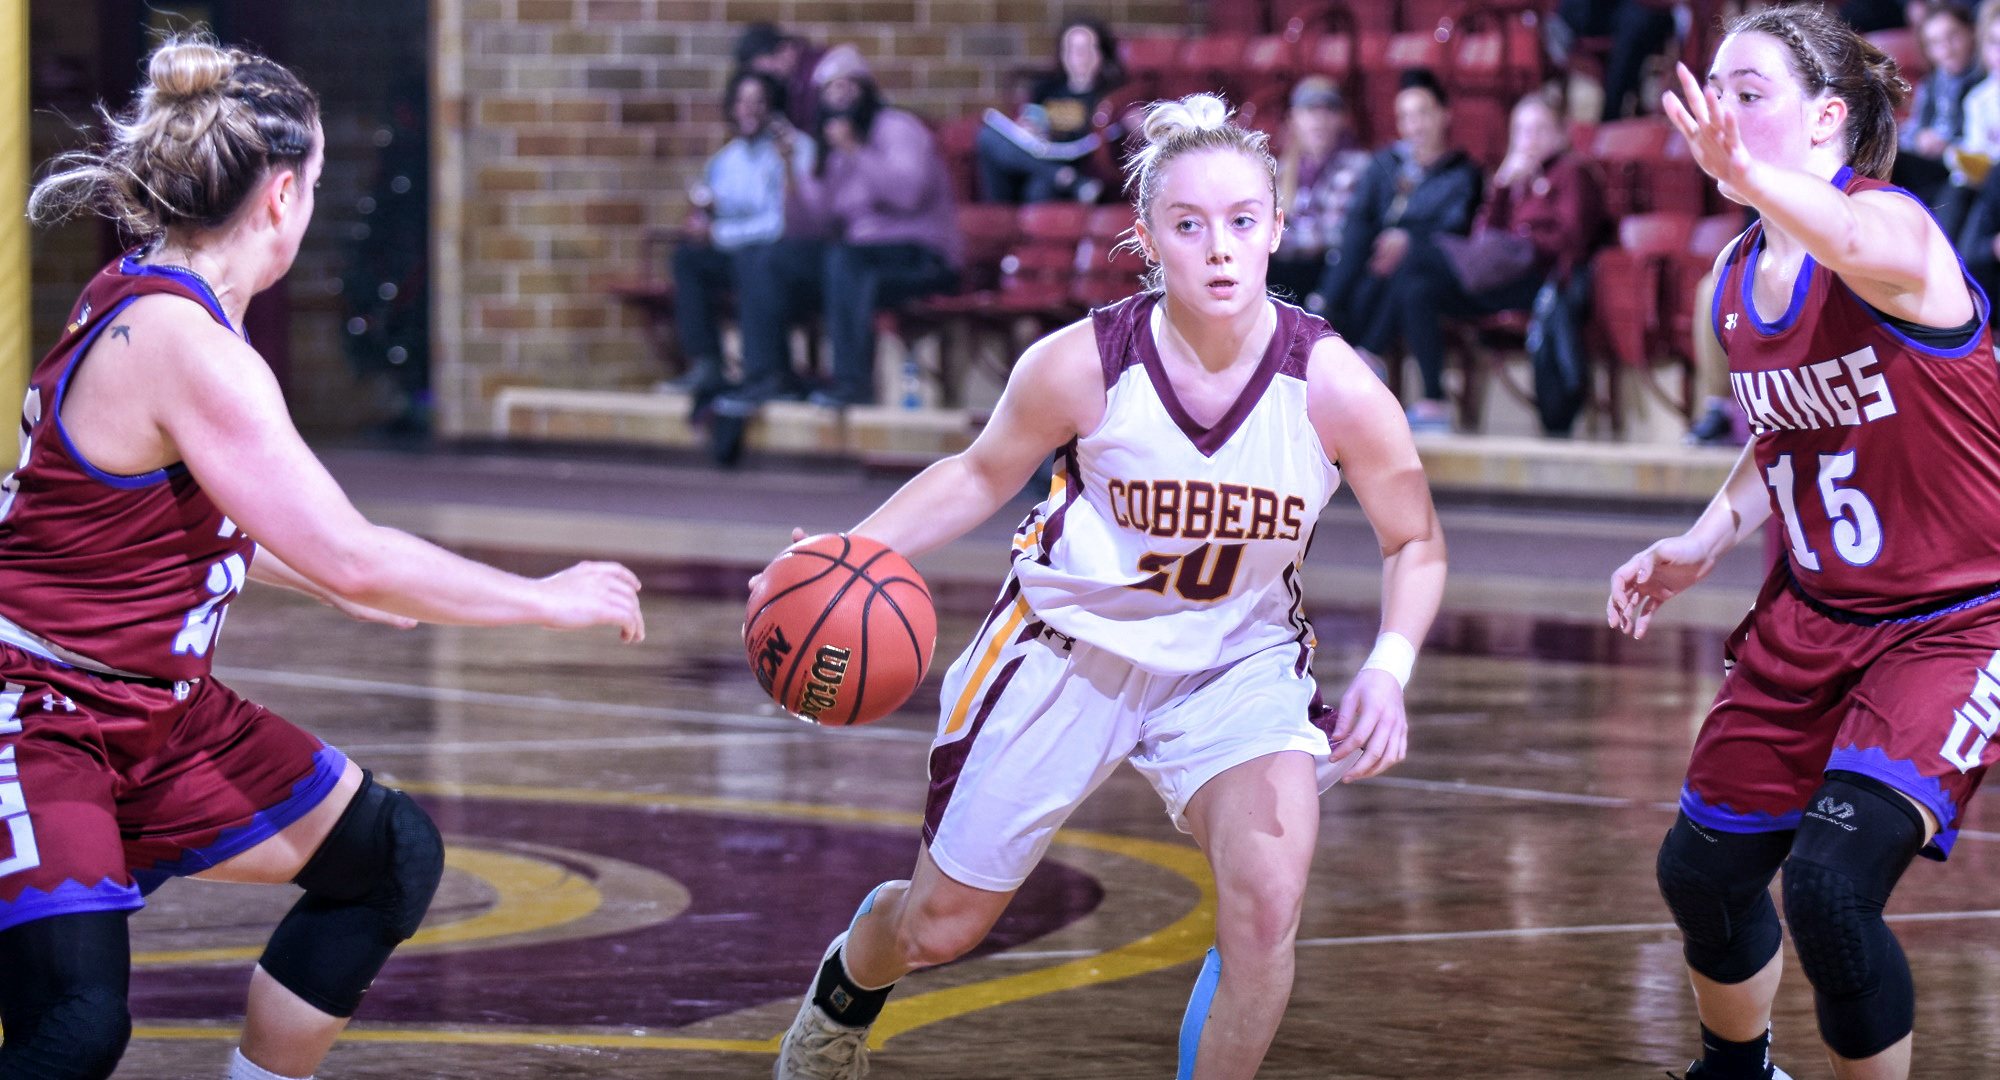 Sophomore Amber Lingen dribbles the ball to the basket during the Cobbers' home opener with Valley City St. She finished with a career-high 22 points.